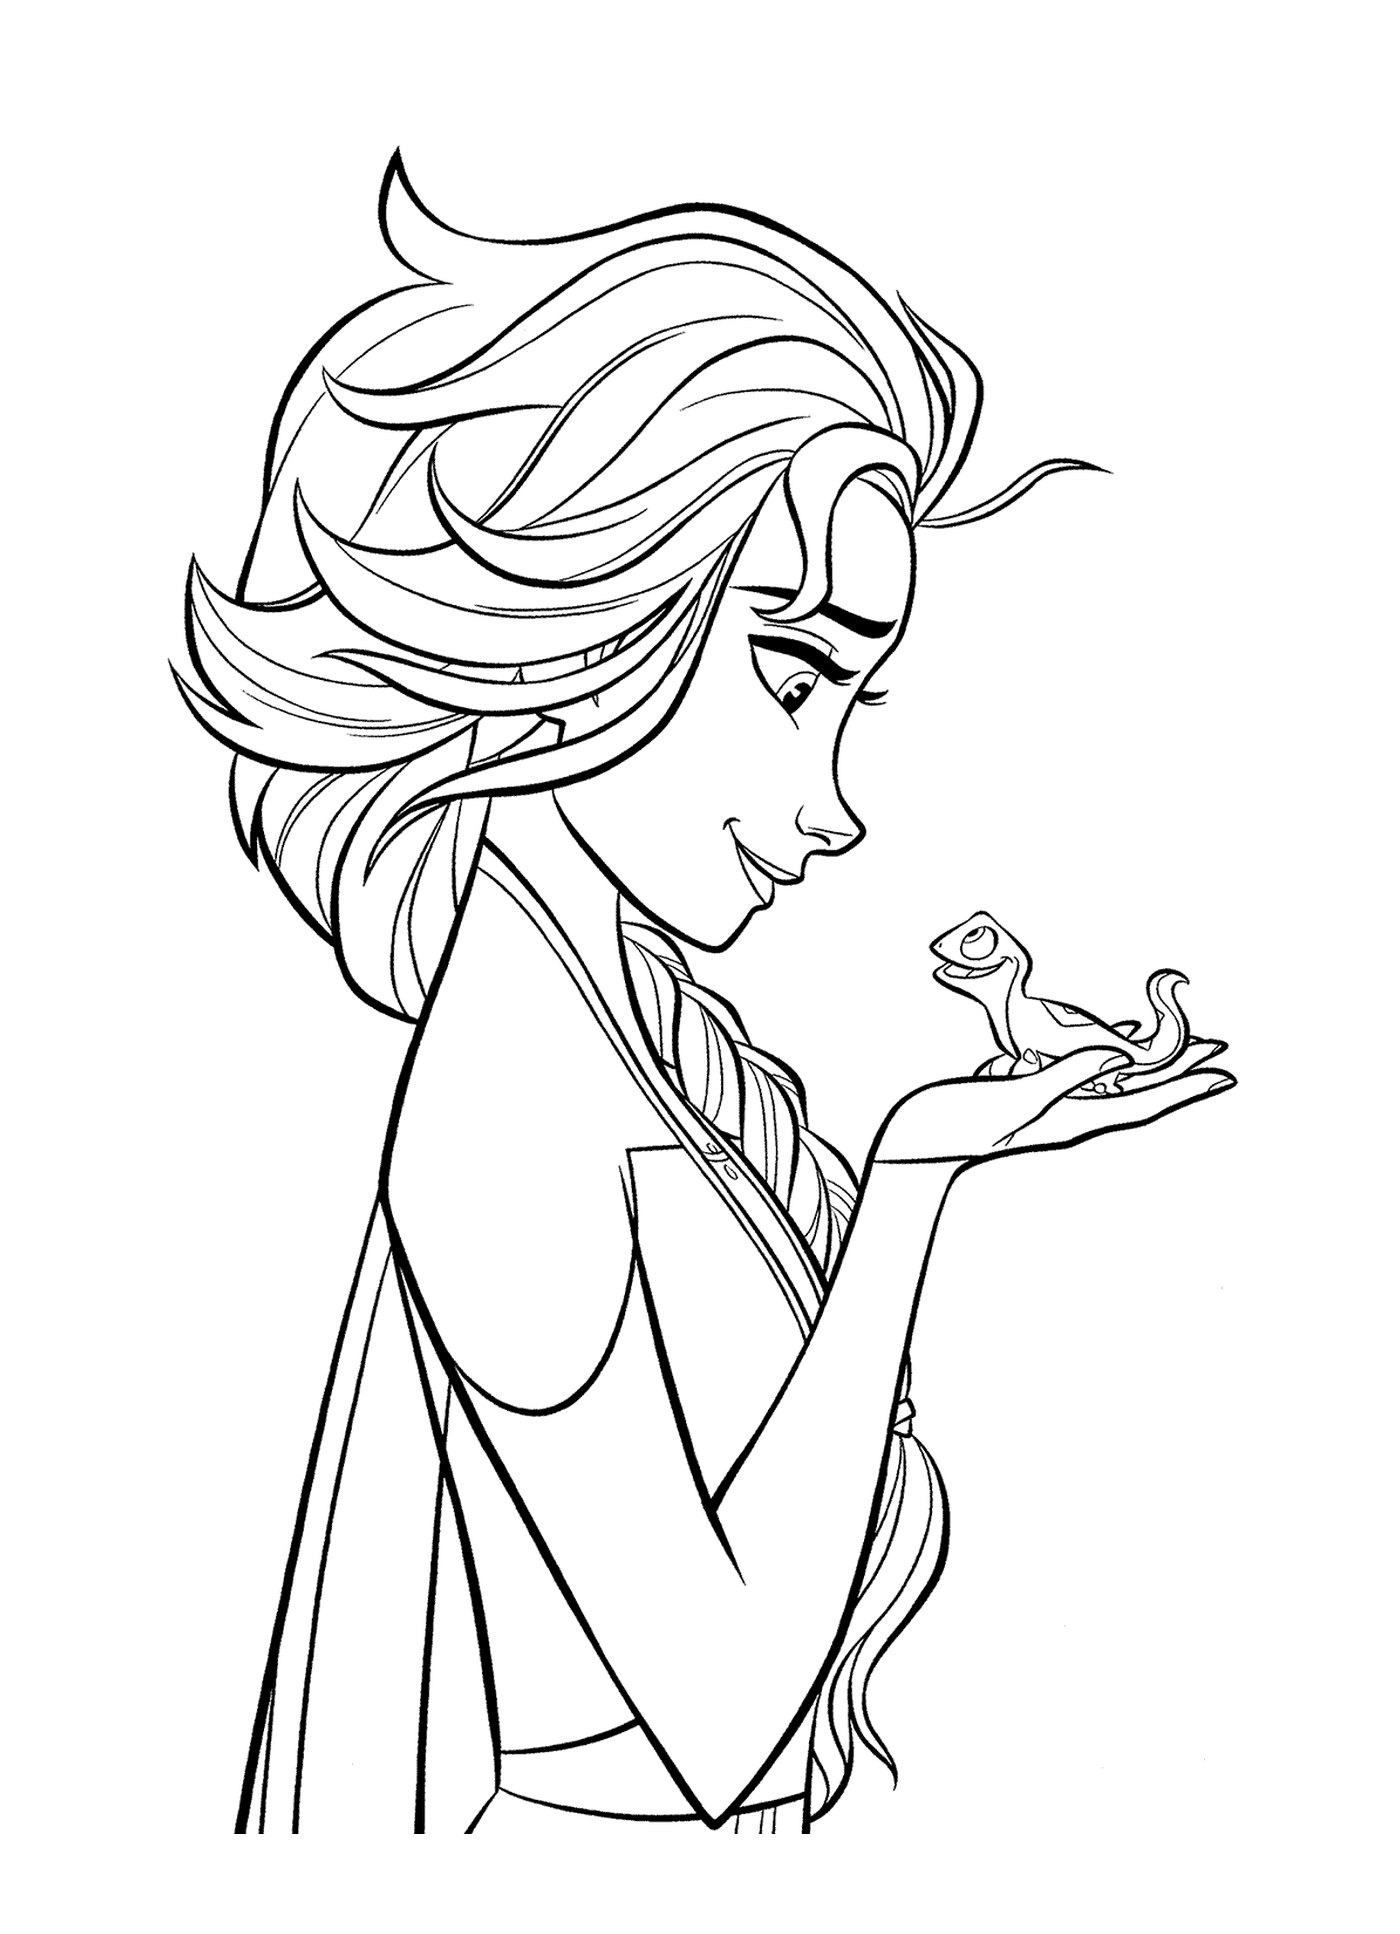  Elsa with the lizard Bruni of The Queen of the Snows 2 